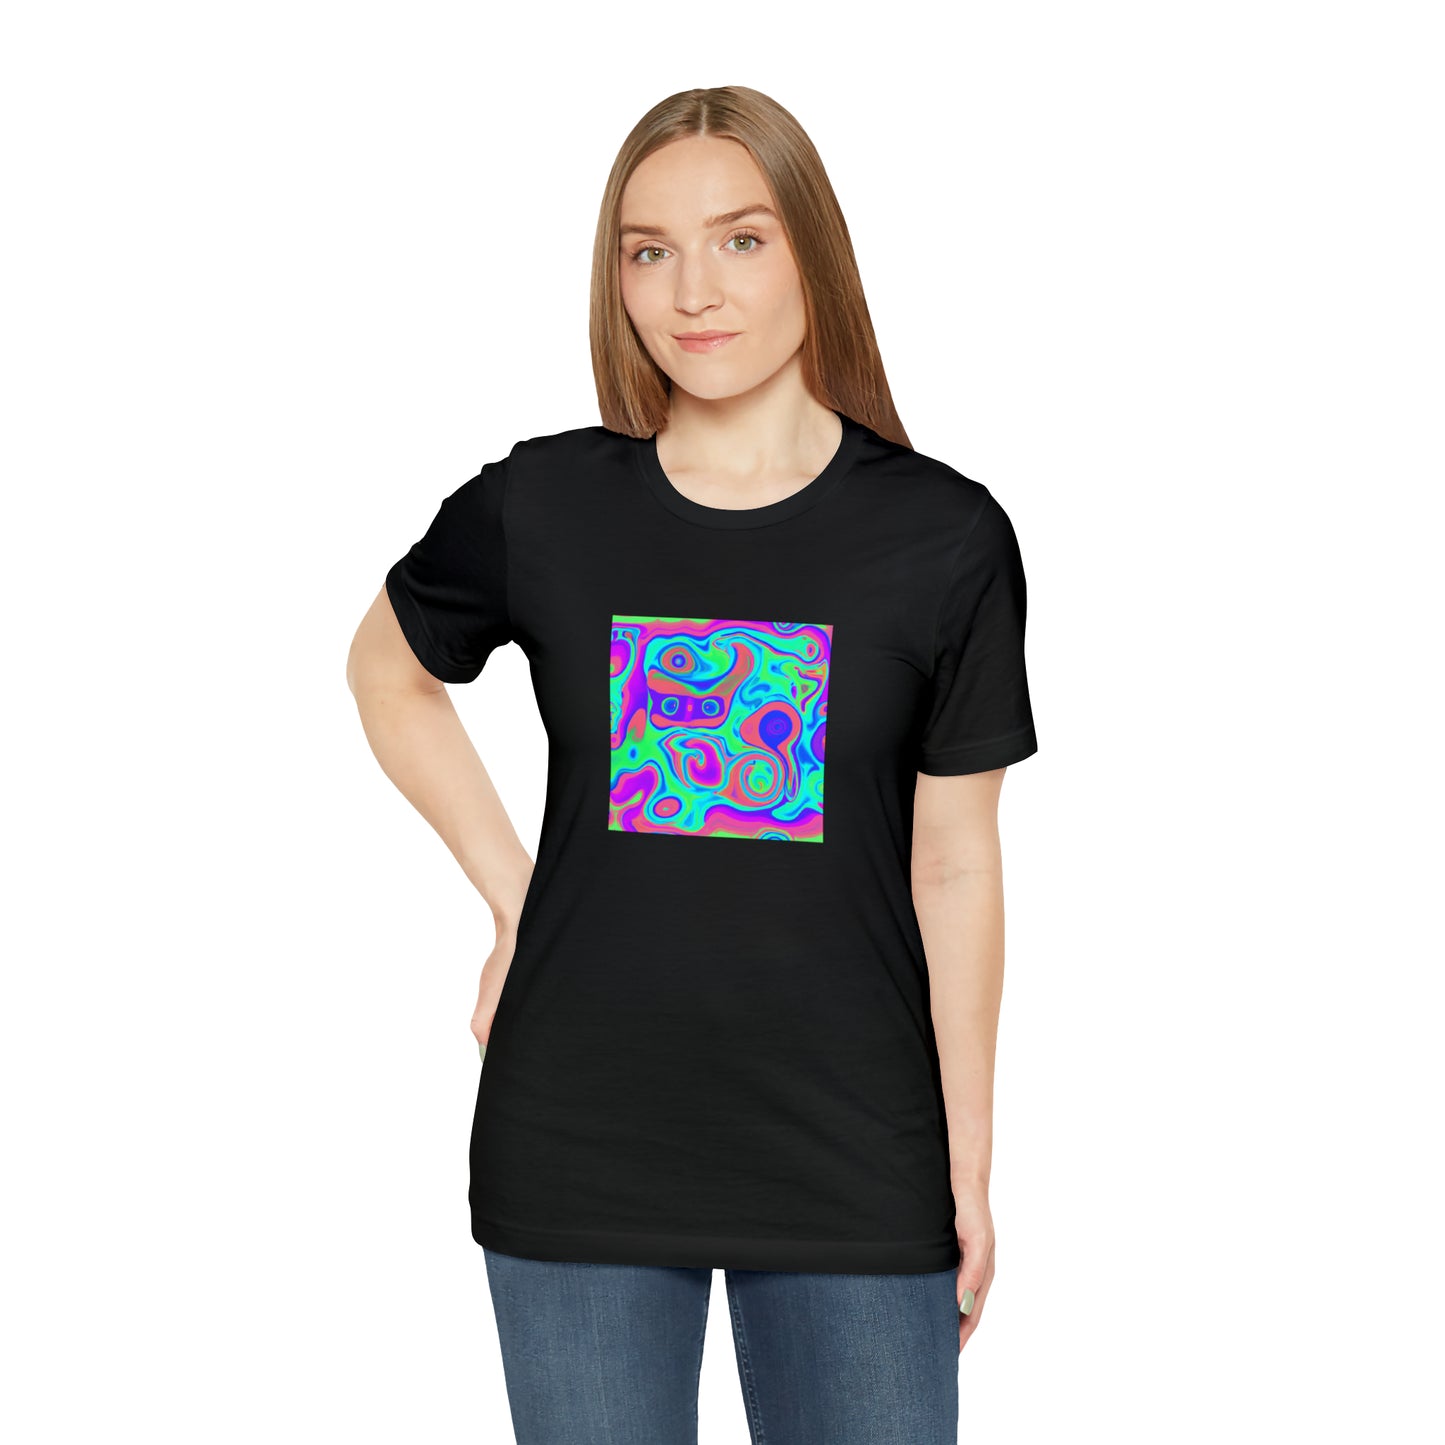 Miles Minnelli - - Psychedelic Trippy Pattern Tee Shirt